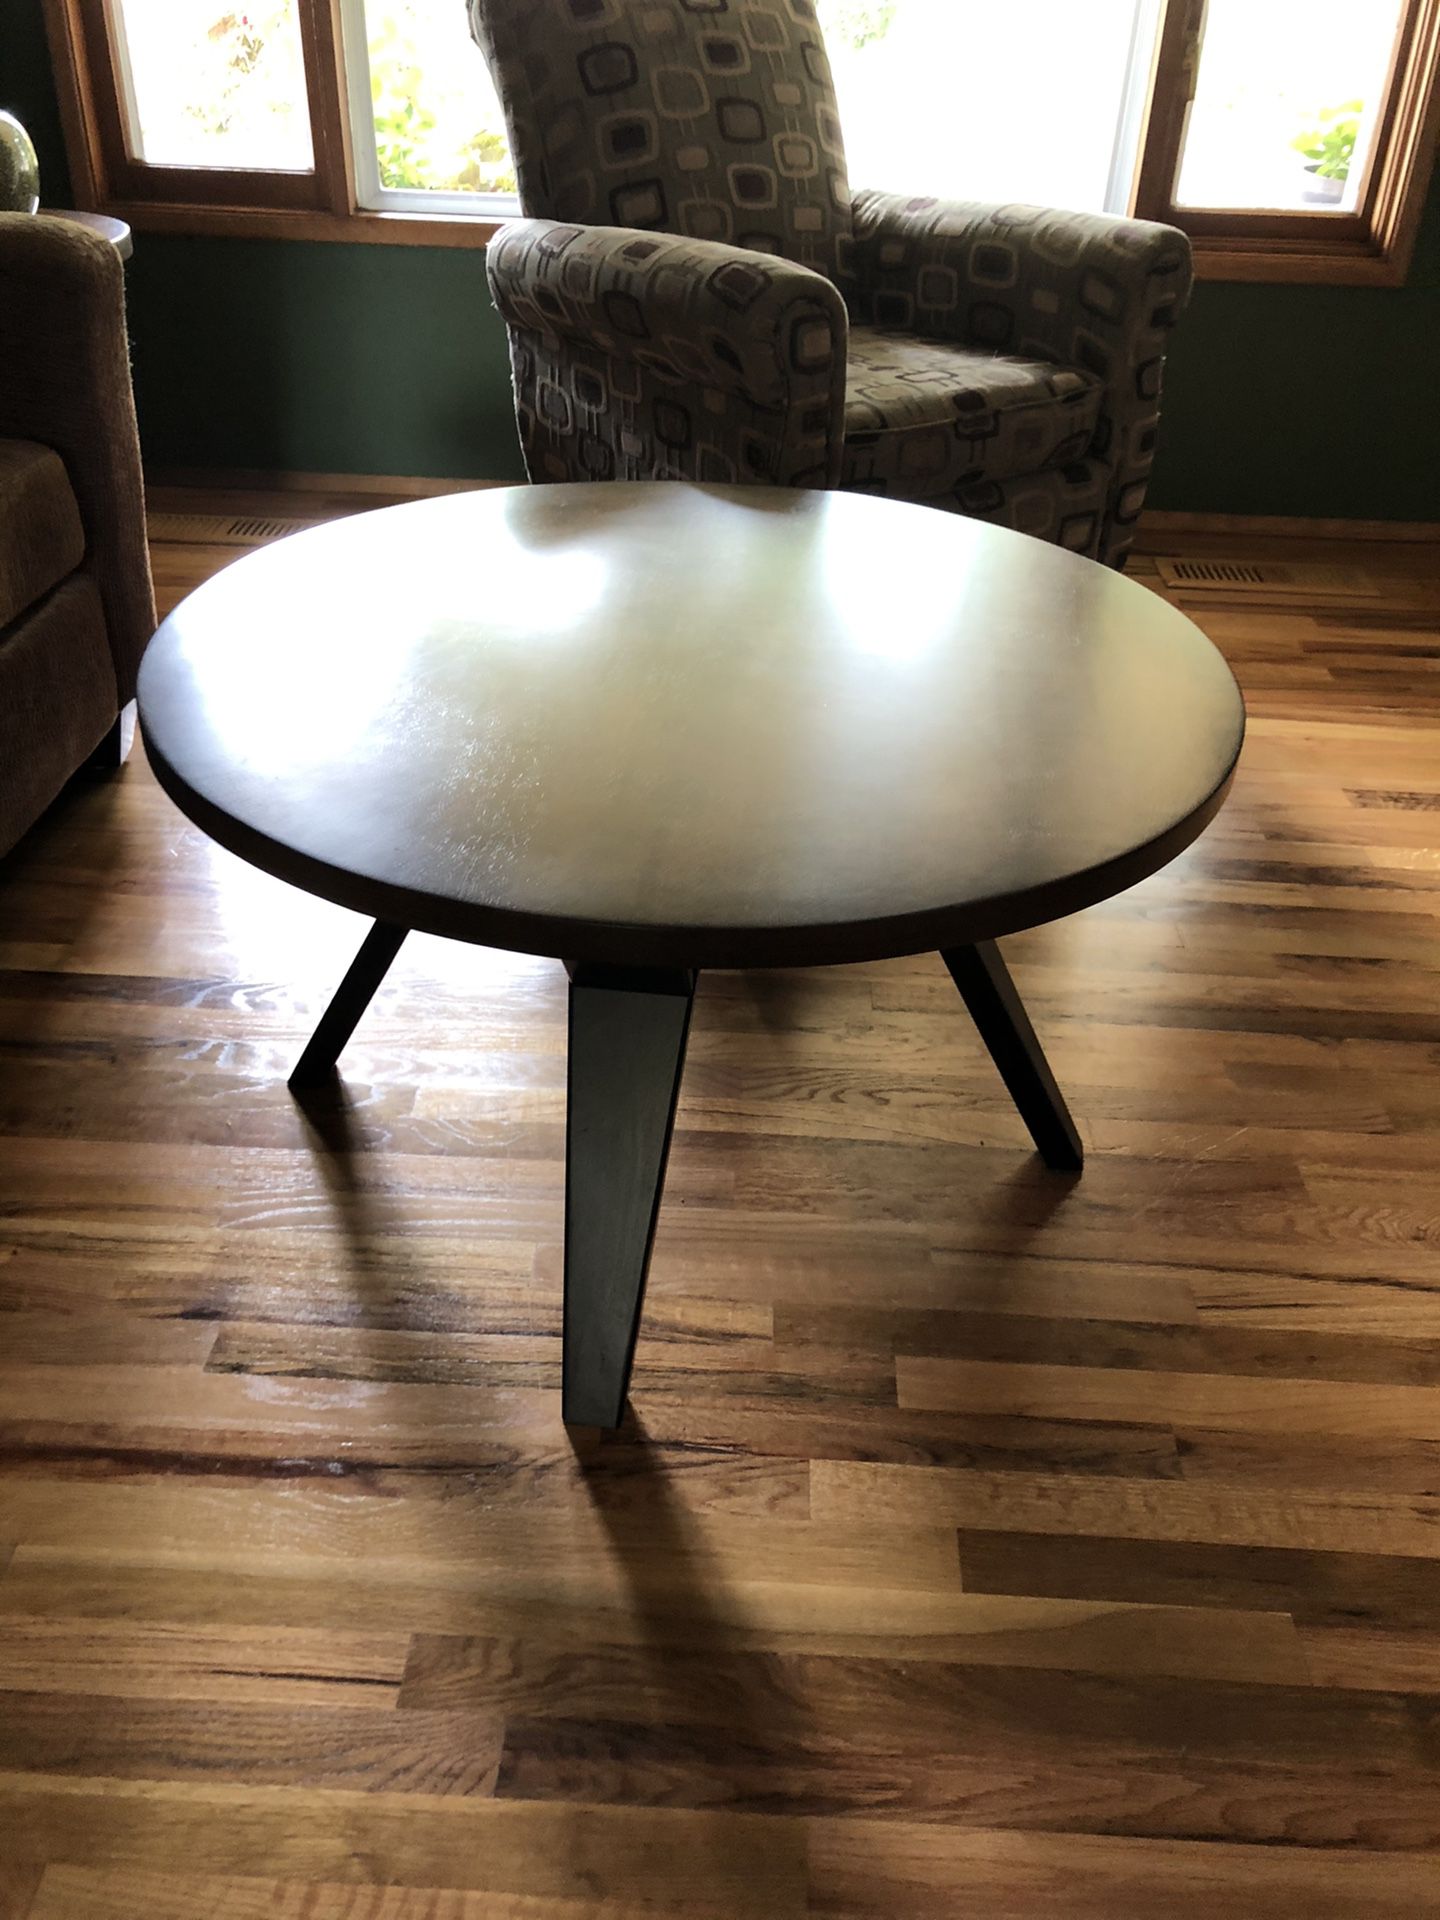 NEW Round Wood Coffee Table & End Tables (3 pieces)